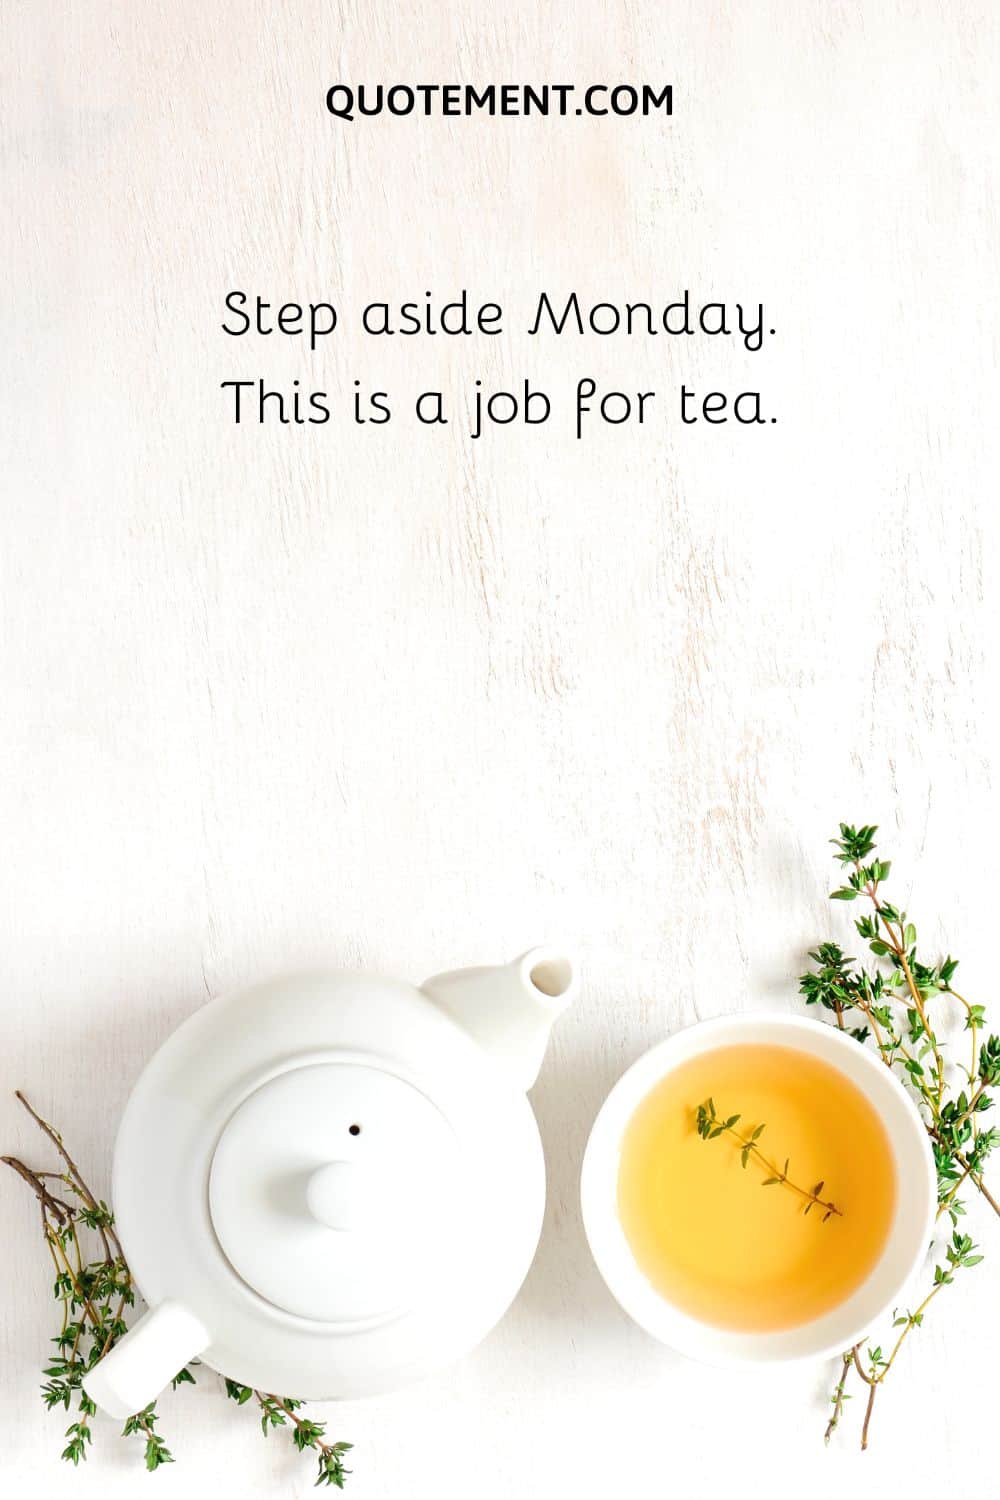 Step aside Monday. This is a job for tea.